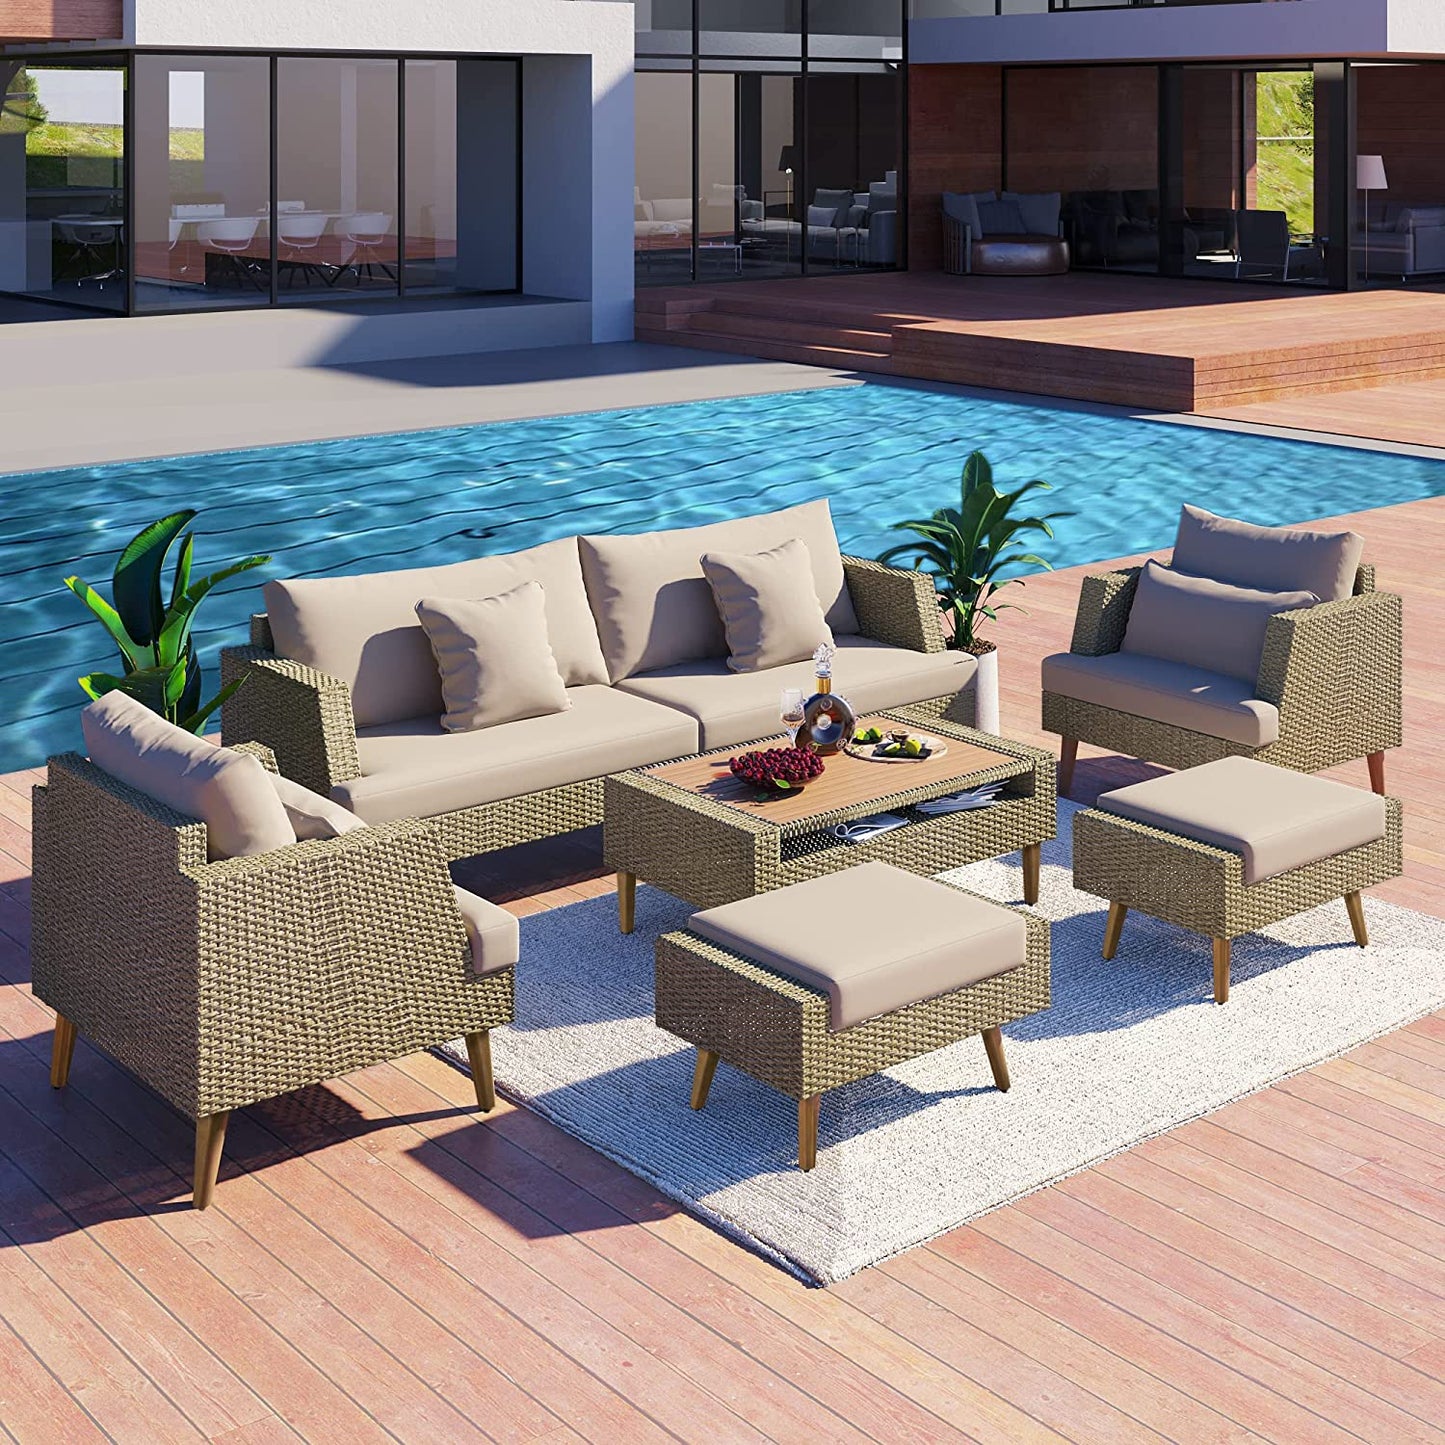 Syngar 6 Piece Patio Furniture Set, Outdoor Sectional Sofa Set with Ottomans, Coffee Table and Brown Cushions, All Weather Brown PE Wicker Conversation Chairs Set for Yard Balcony Poolside Deck